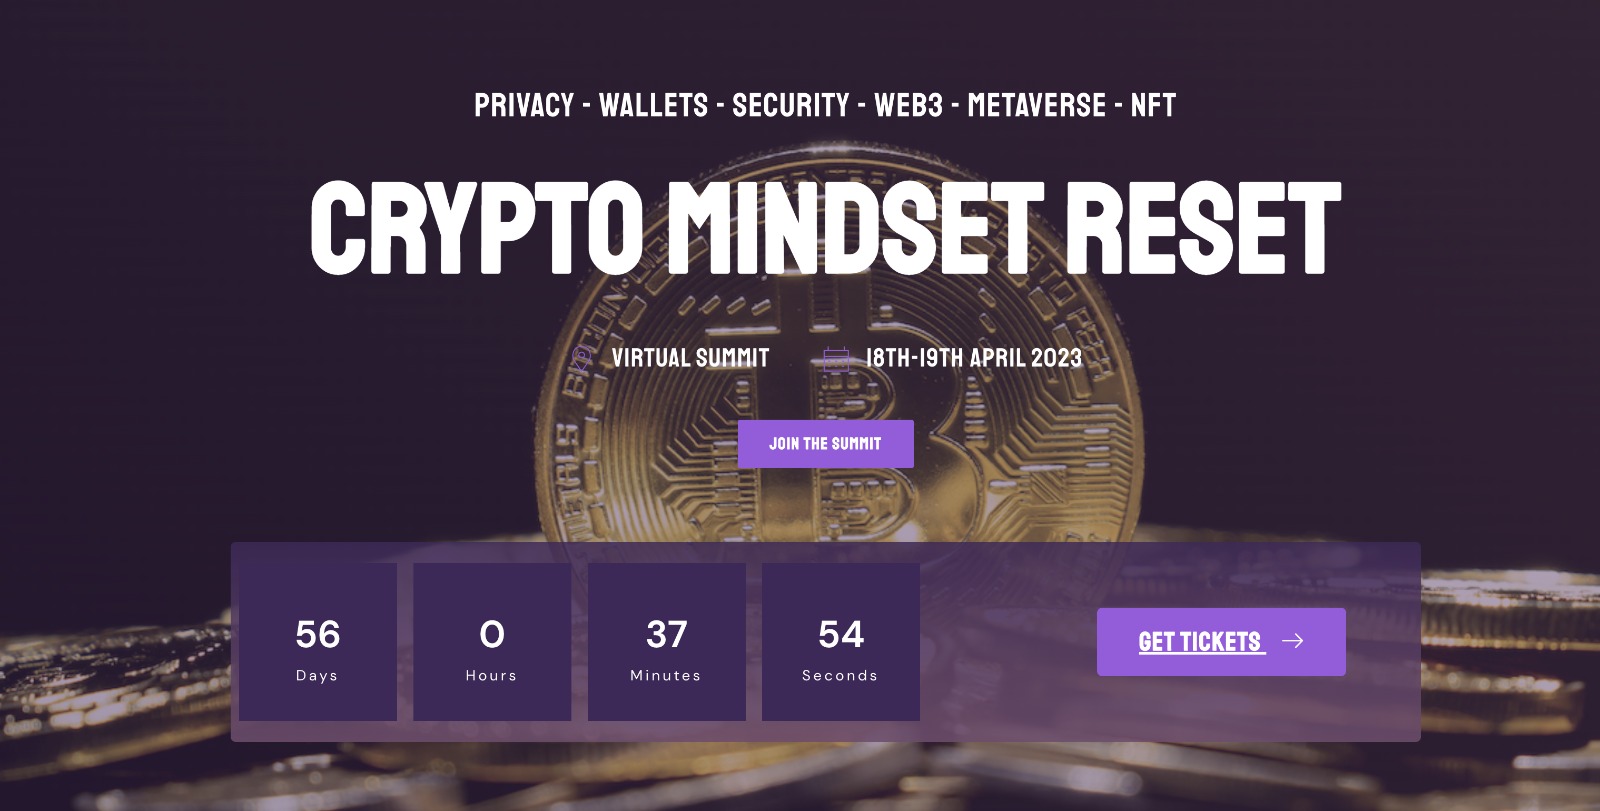 Vegas Crypto Group announce the Crypto Mindset Reset Virtual Summit Happening Online April 18th and 19th 2023